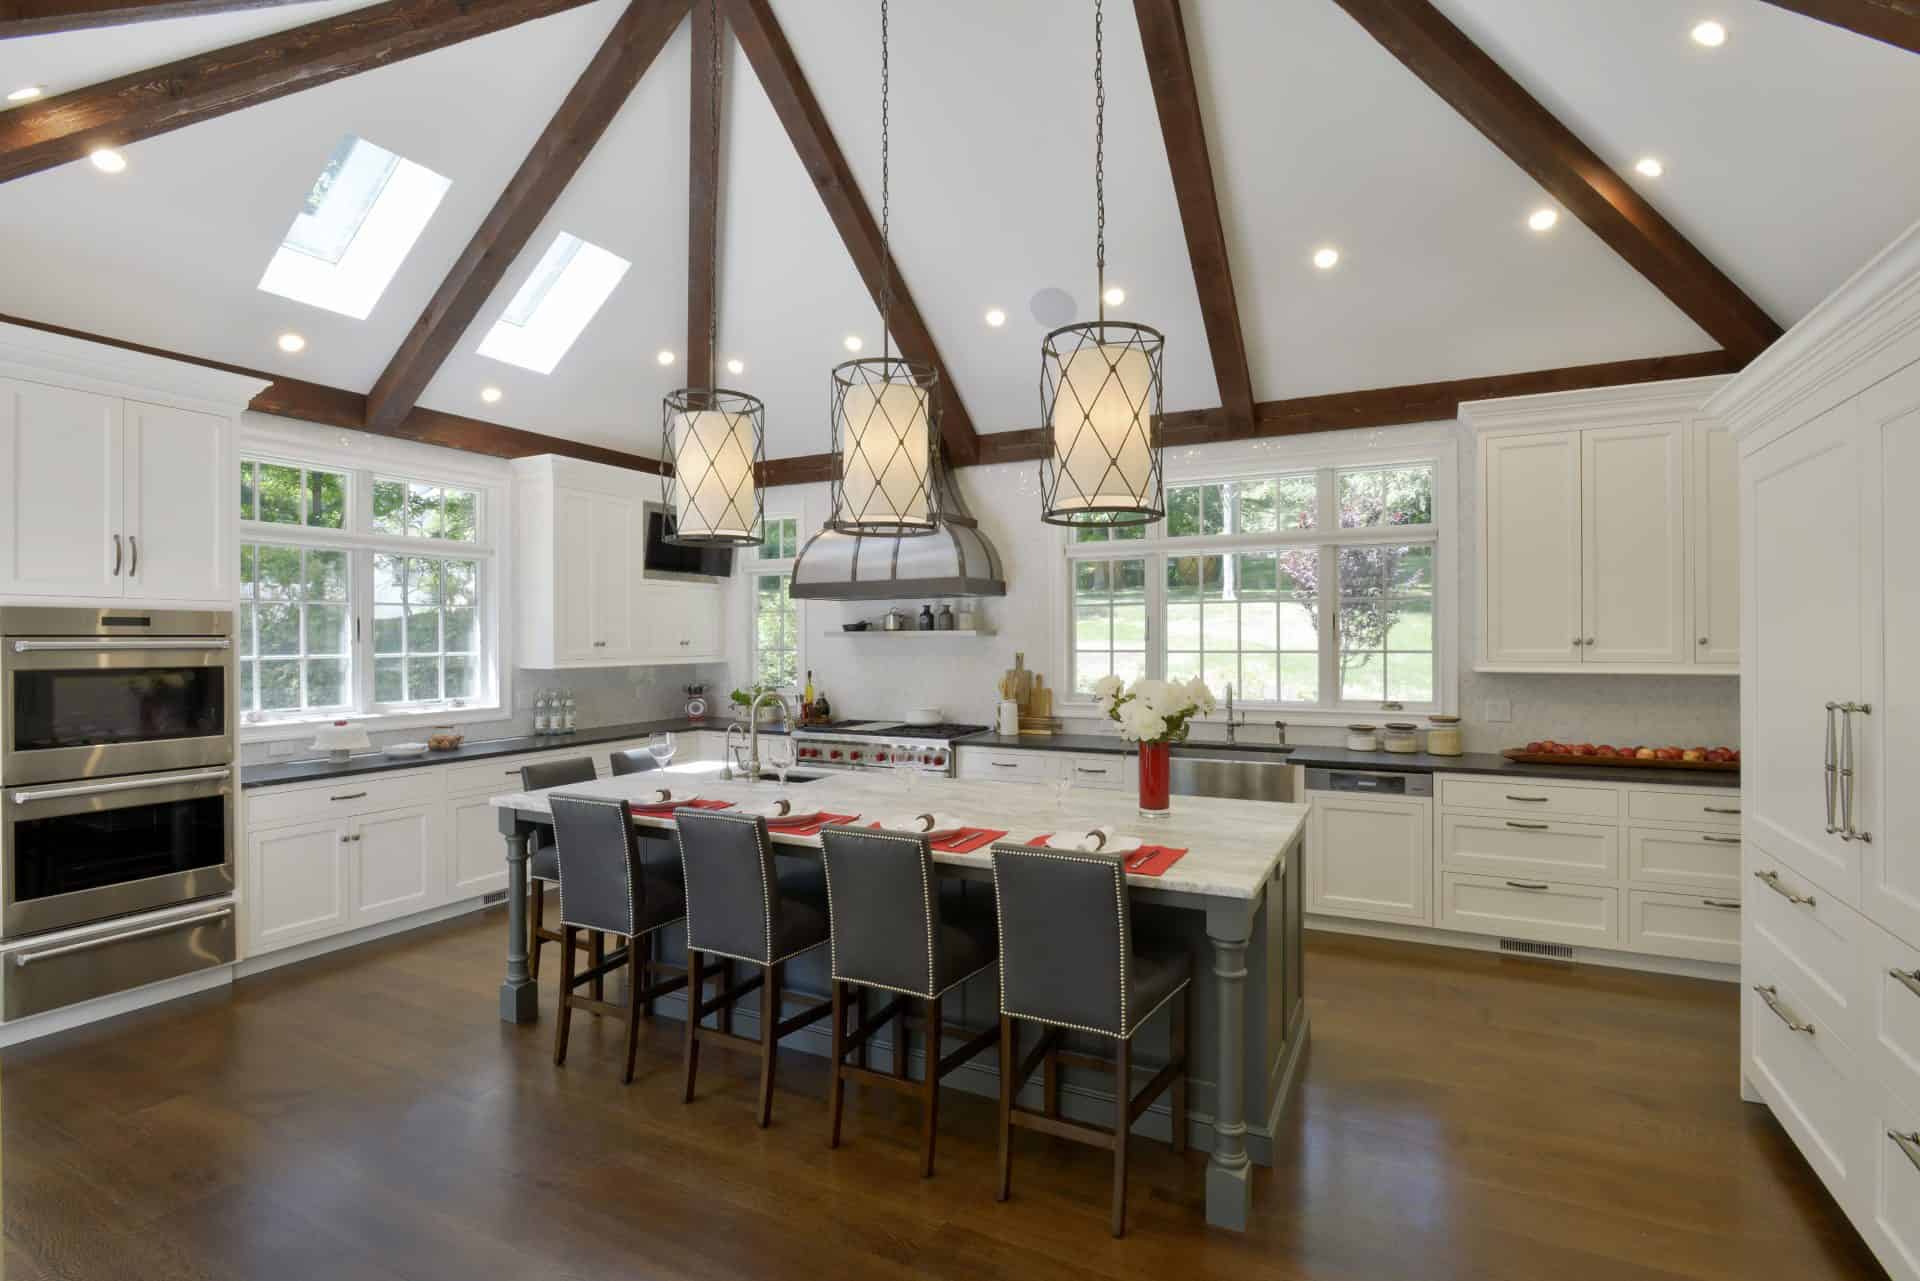 Classic kitchen in Somers NY features catherdral ceiling with exposed beams and white painted Bilotta cabinetry.